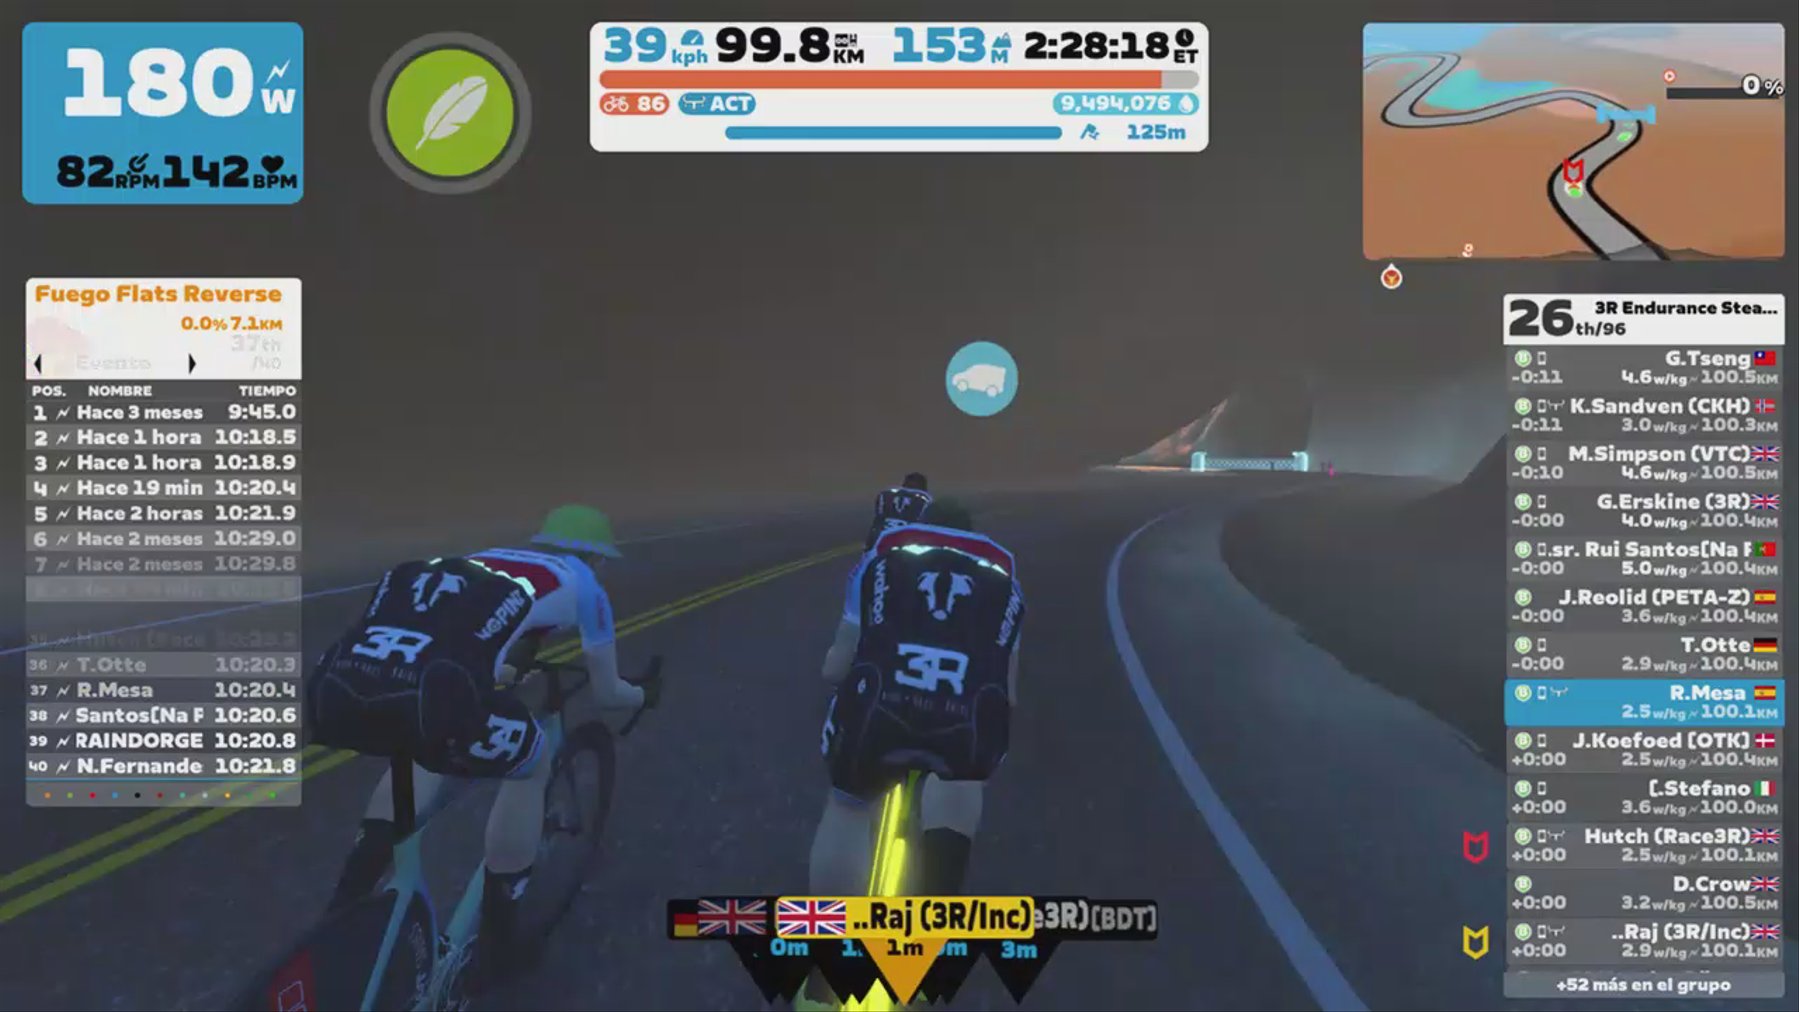 Zwift - Group Ride: 3R Endurance Steady Ride (B) on Tempus Fugit in Watopia